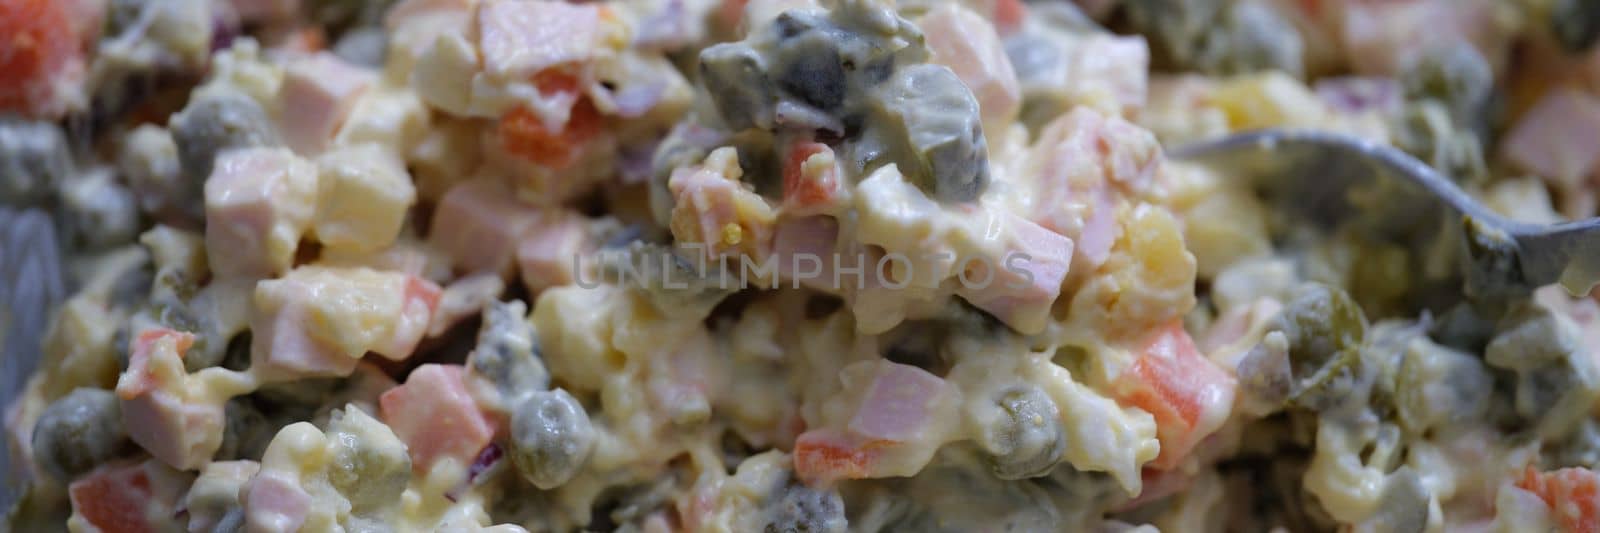 Traditional Russian Olivier salad of boiled sausage pickled green peas, eggs and mayonnaise by kuprevich